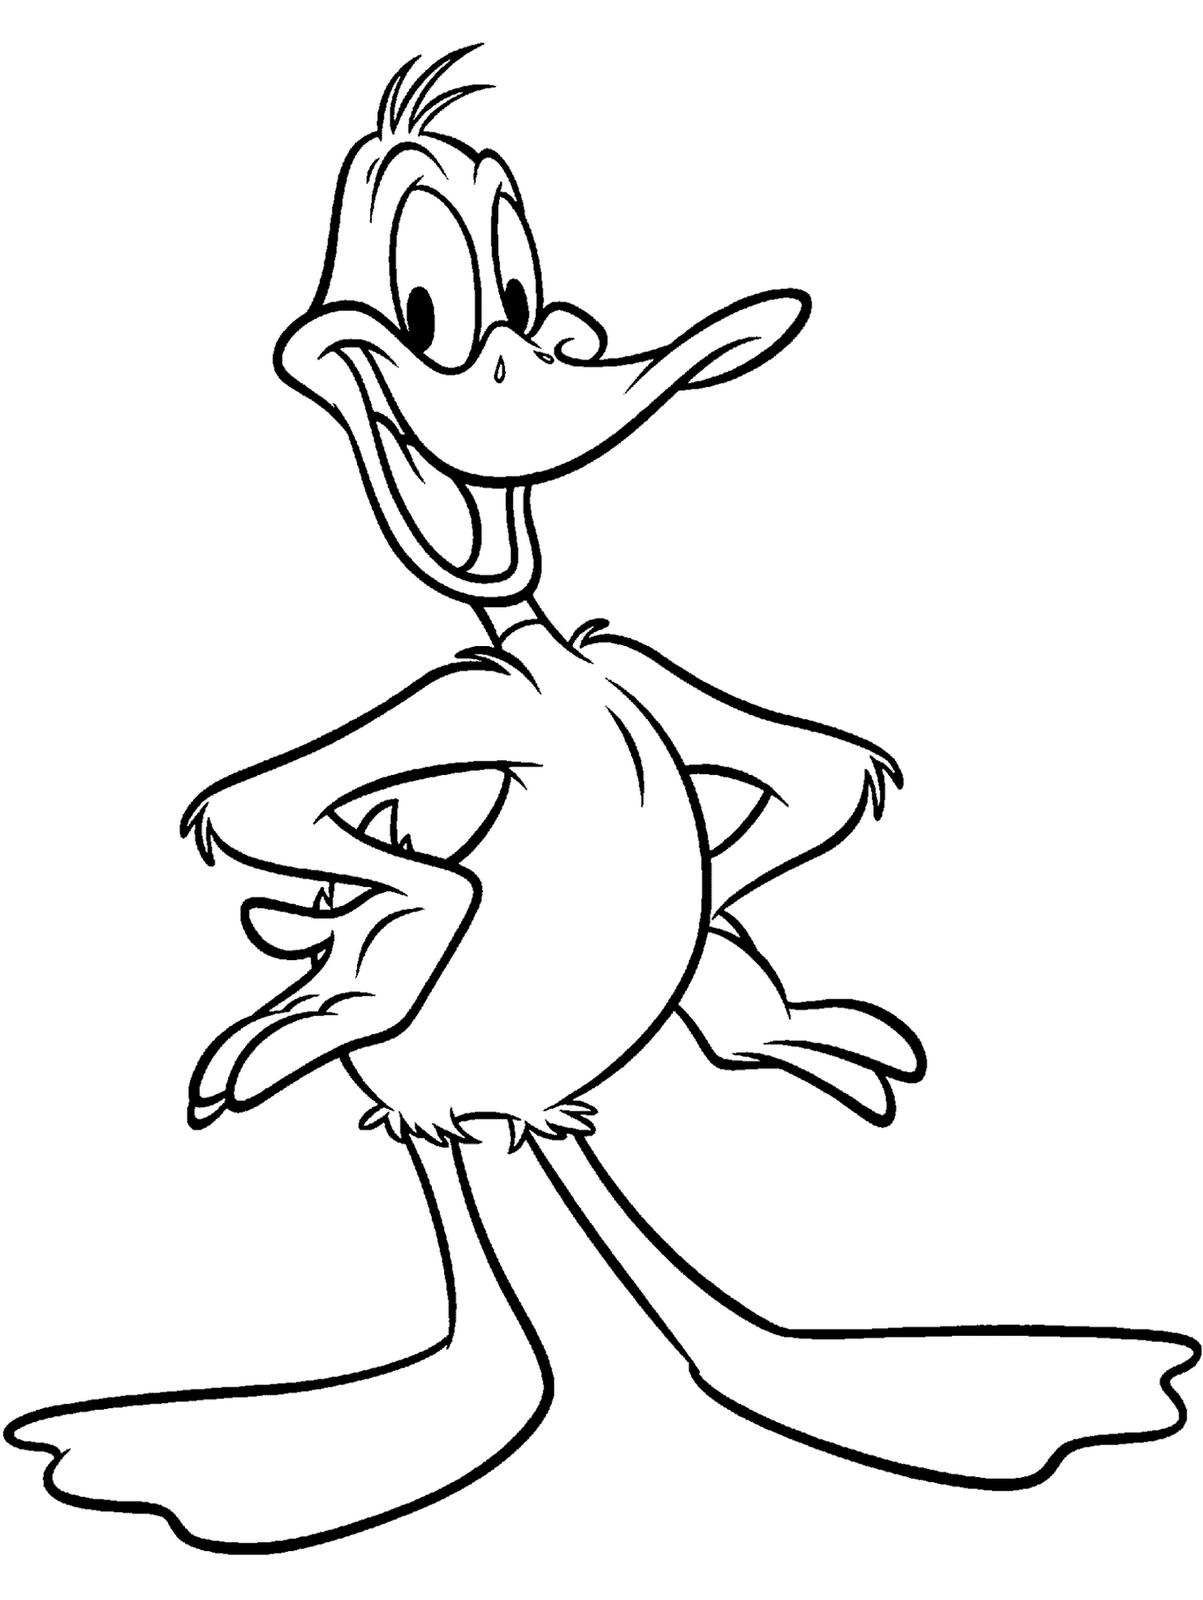 Daffy duck coloring picture 3